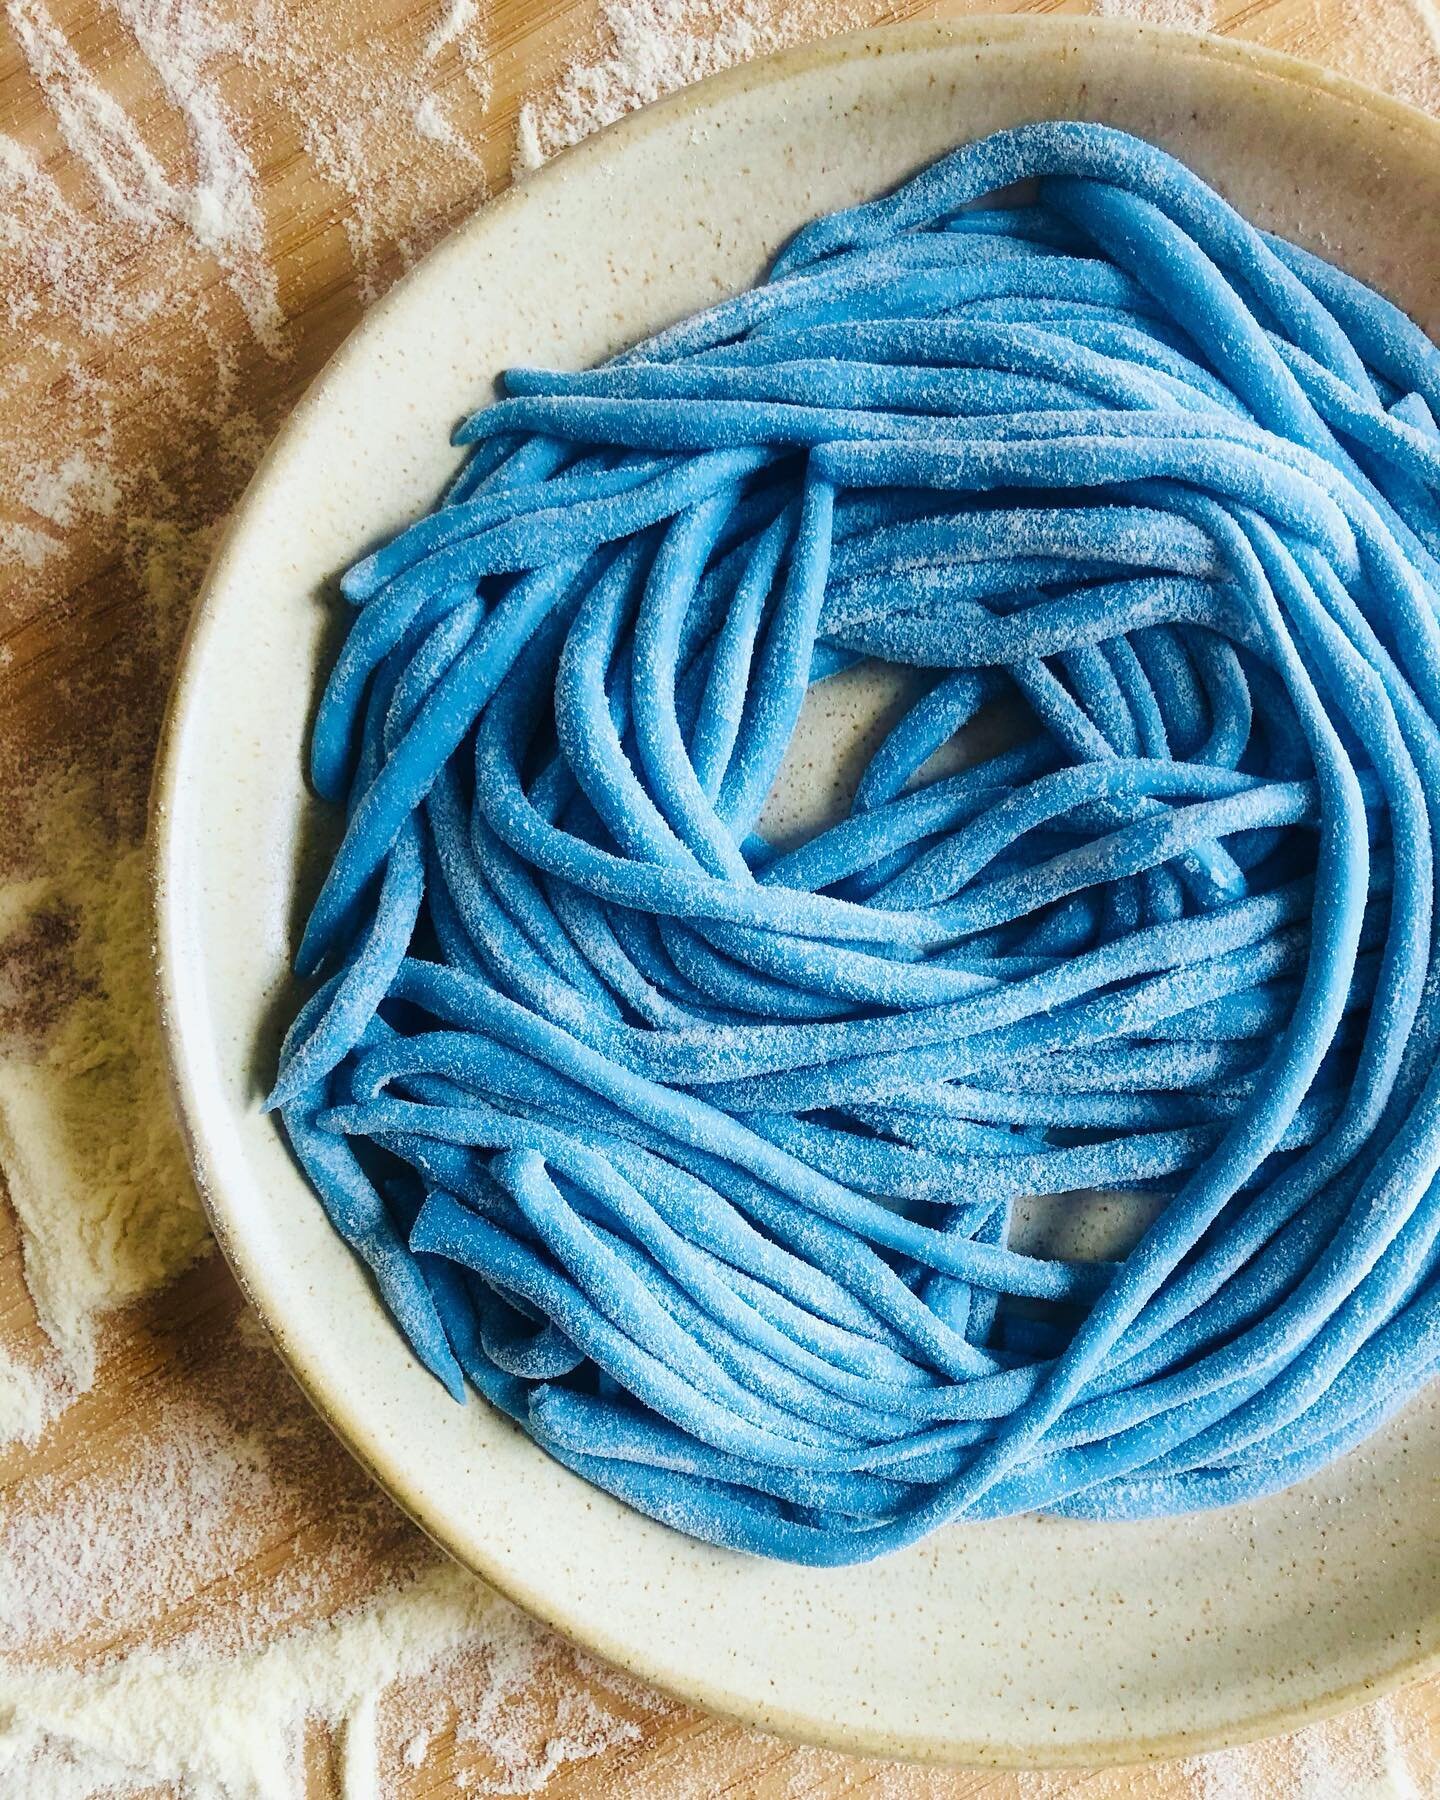 Pici! Hand rolled noodles made from semolina, water, olive oil, and in this case spirulina. So rustic, so blue, so so old. No tools and no animal products for pici noodles. A truly ancient noodle that Italian historians trace to the Etruscan peoples 